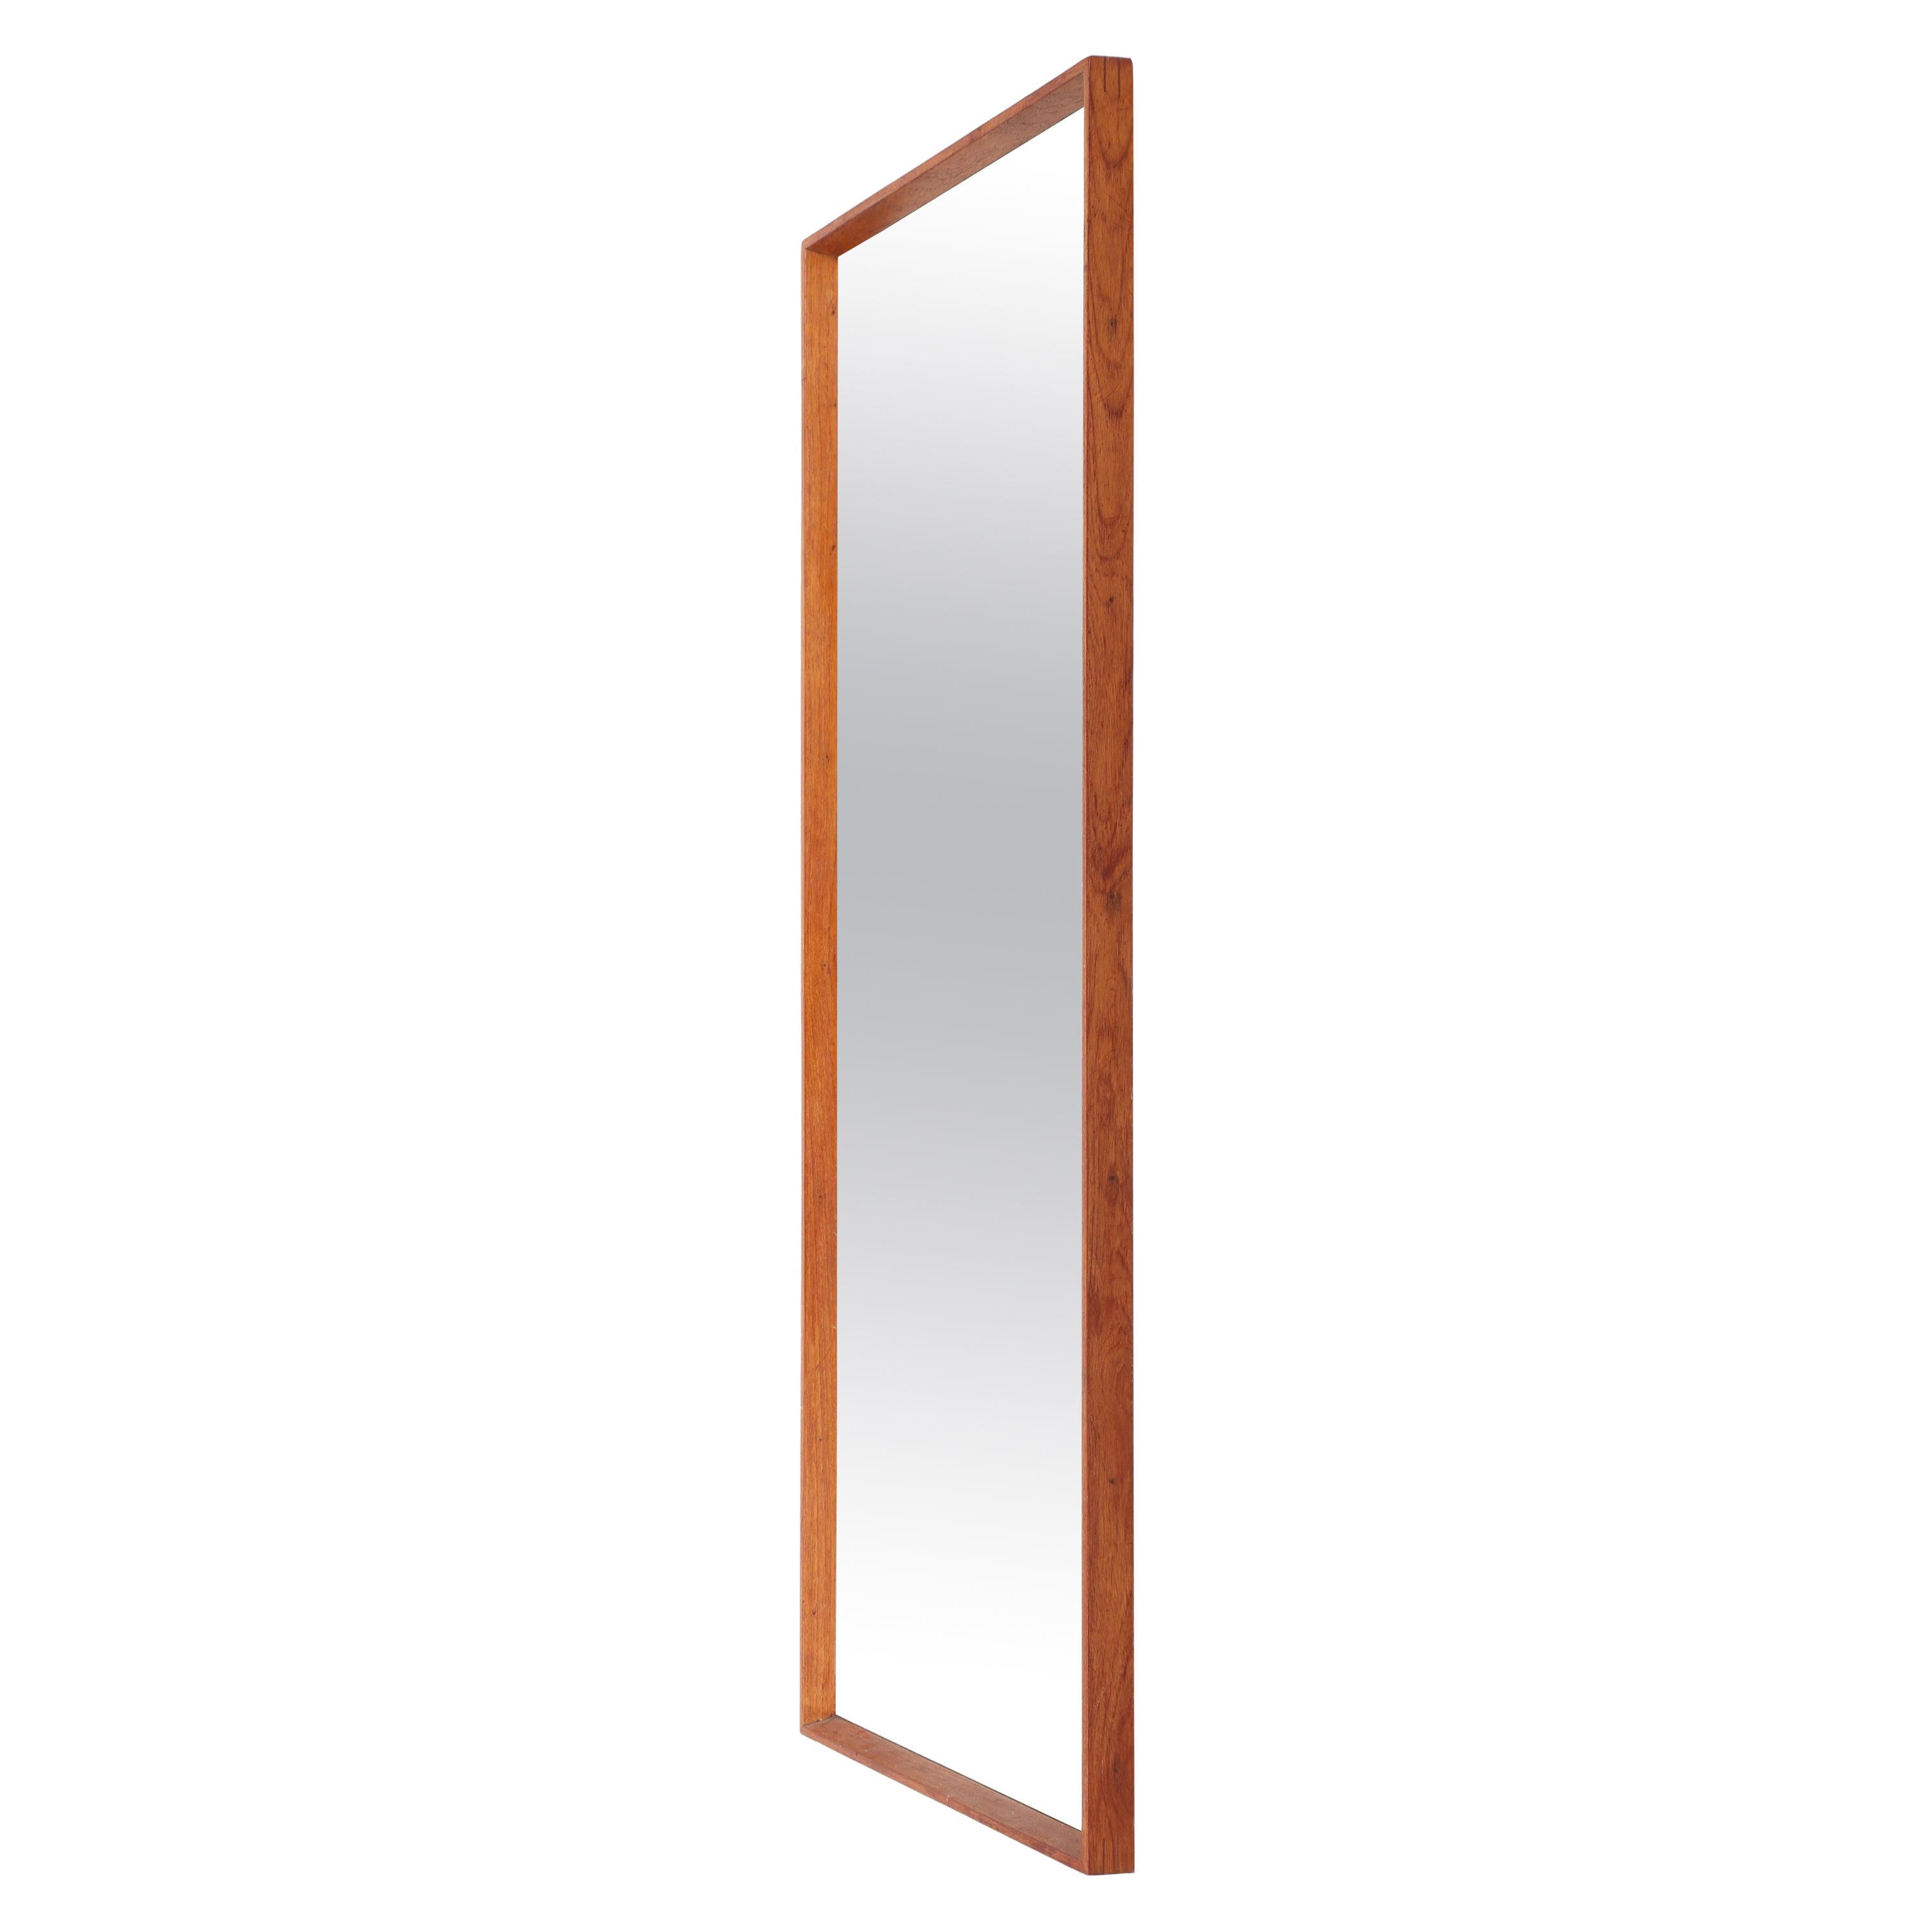 Large Midcentury Wall Mirror in Teak, Made in Sweden, 1950s